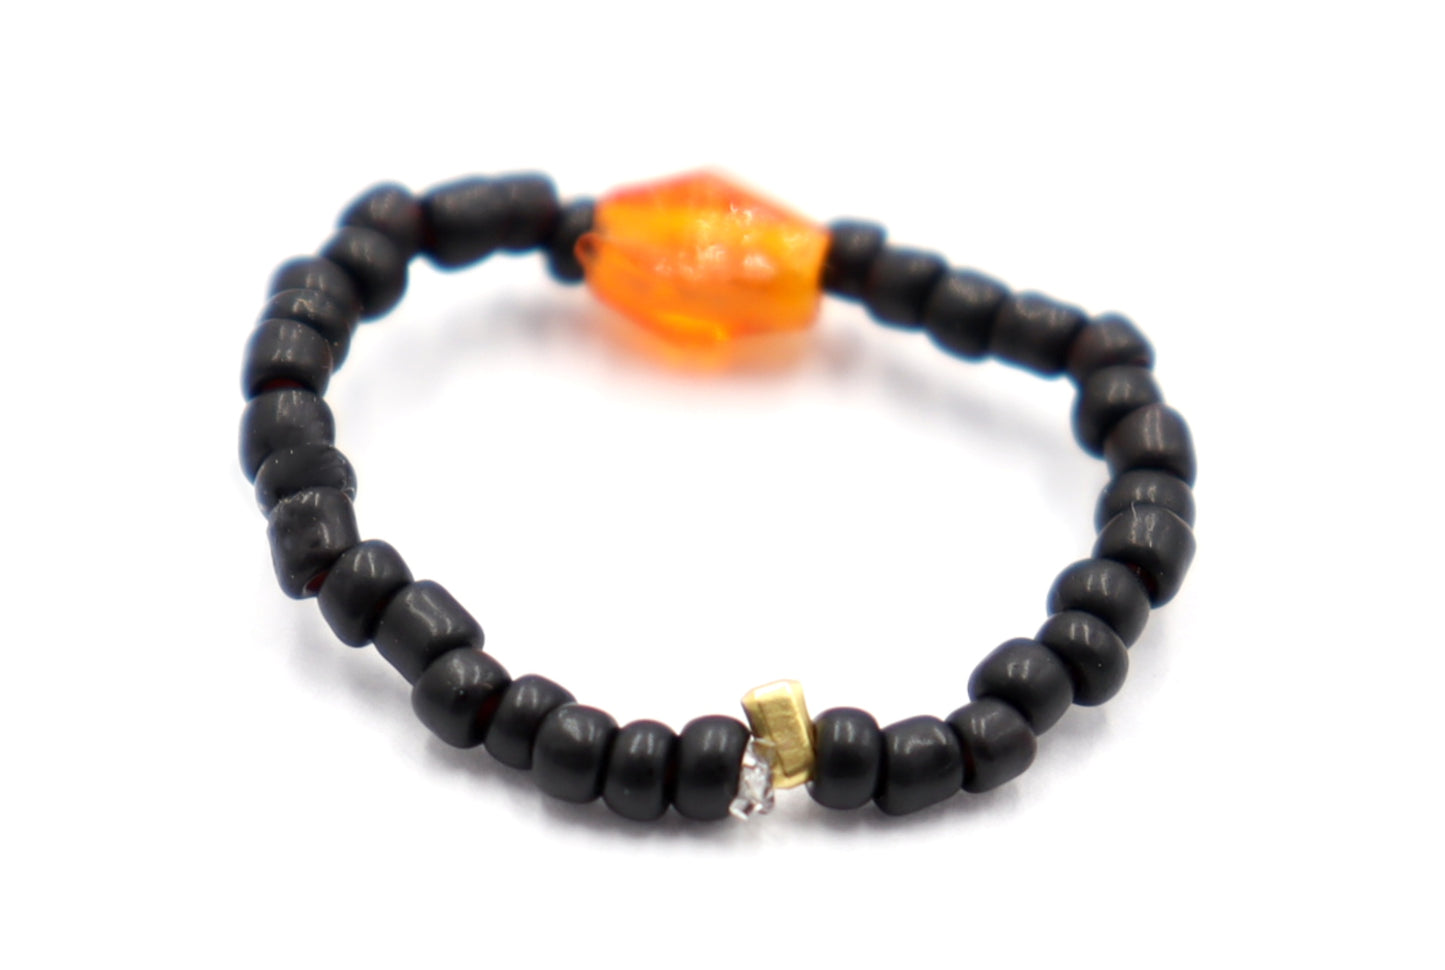 Down to Clown It's The Great Pumpkin Halloween Black and Orange Stretch Ring by Monkey's Mojo